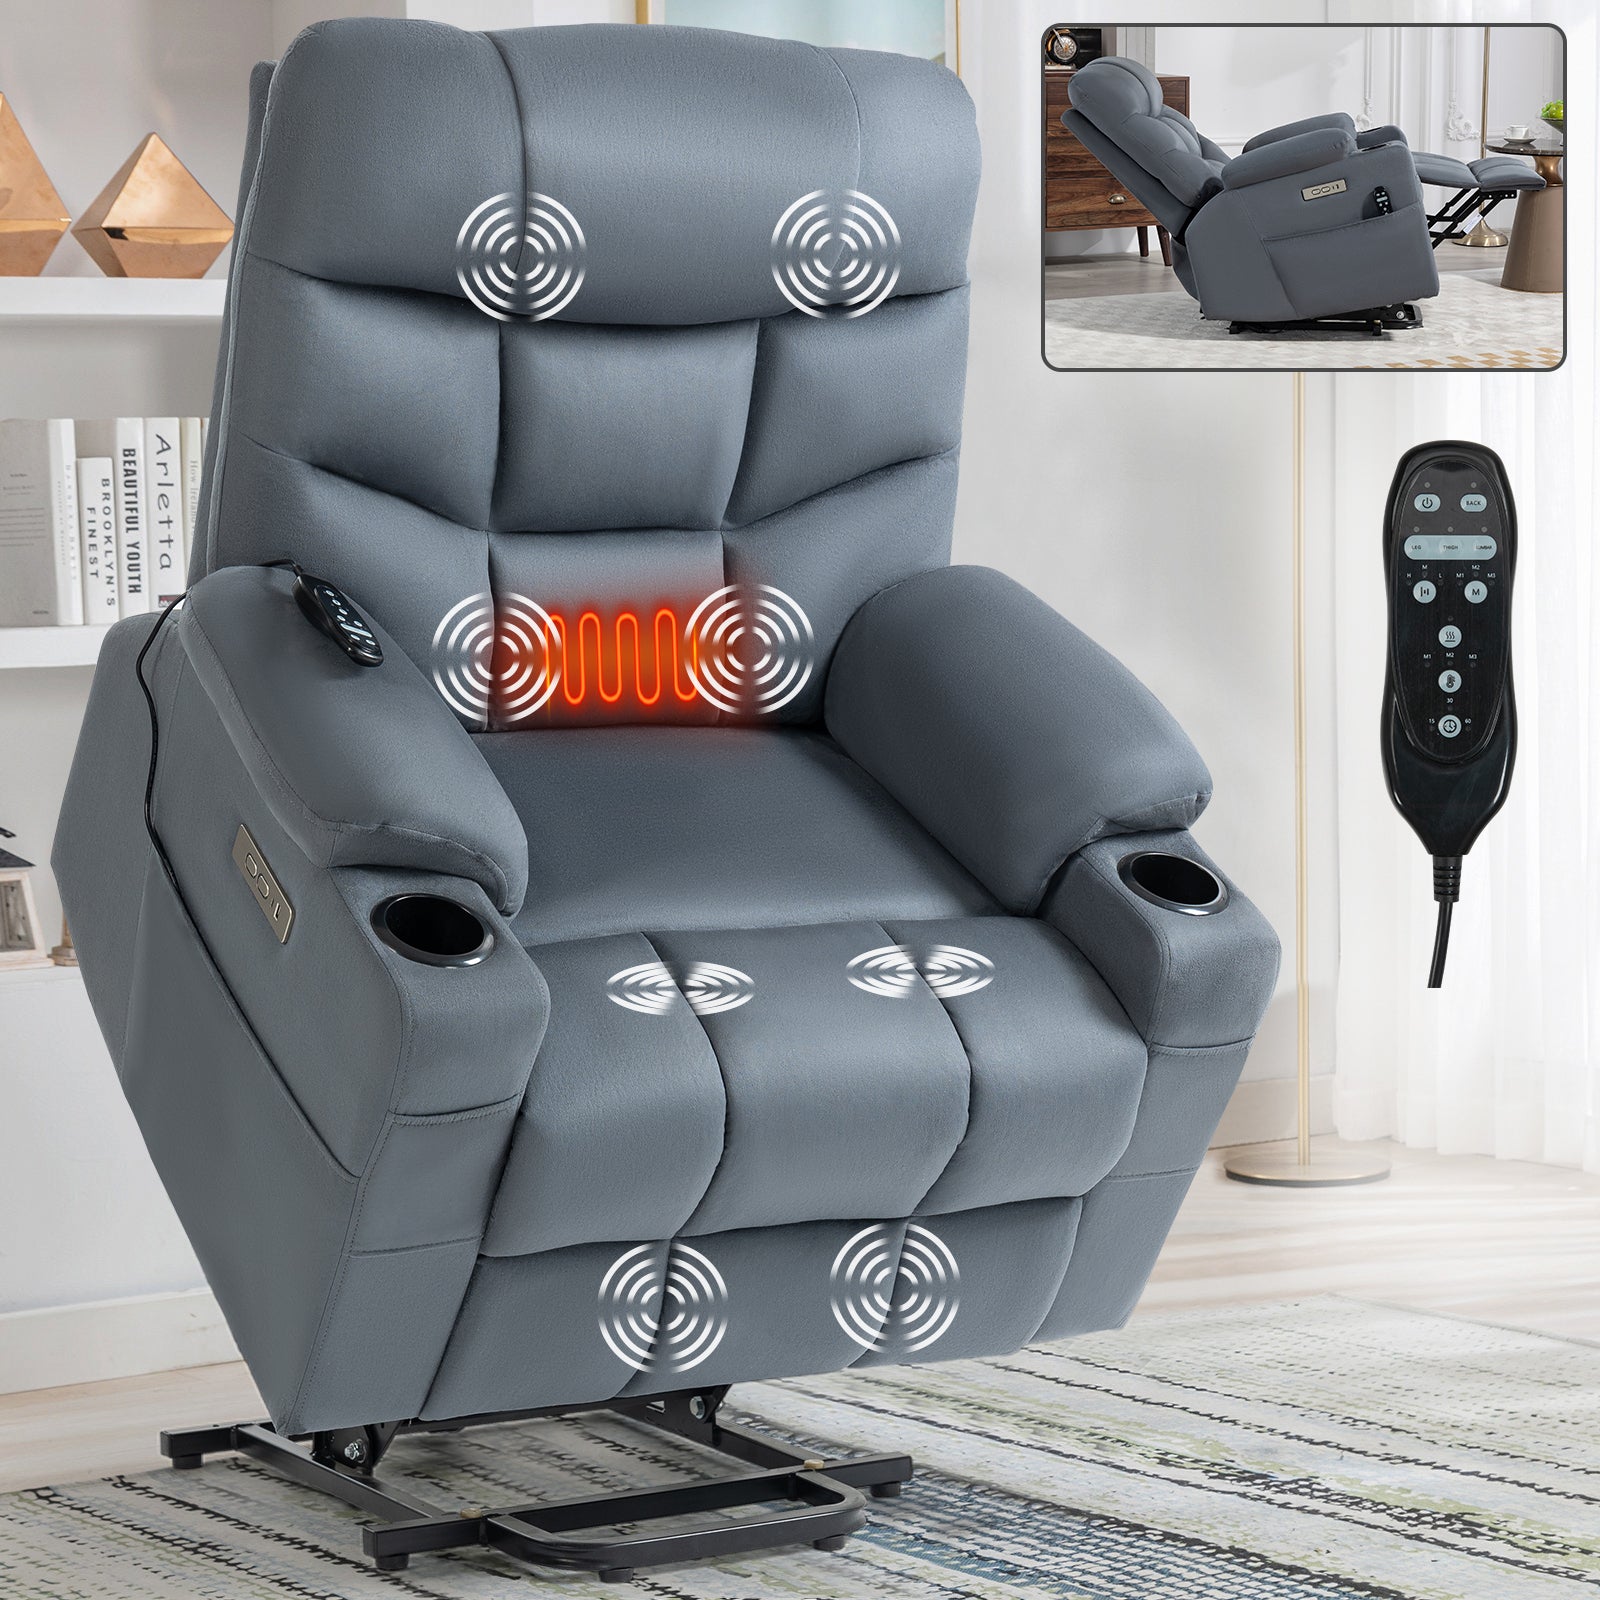 Mason dark gray Suede Power Lift Recliner with Massage and Heating, USB Charge Ports and Cup Holder